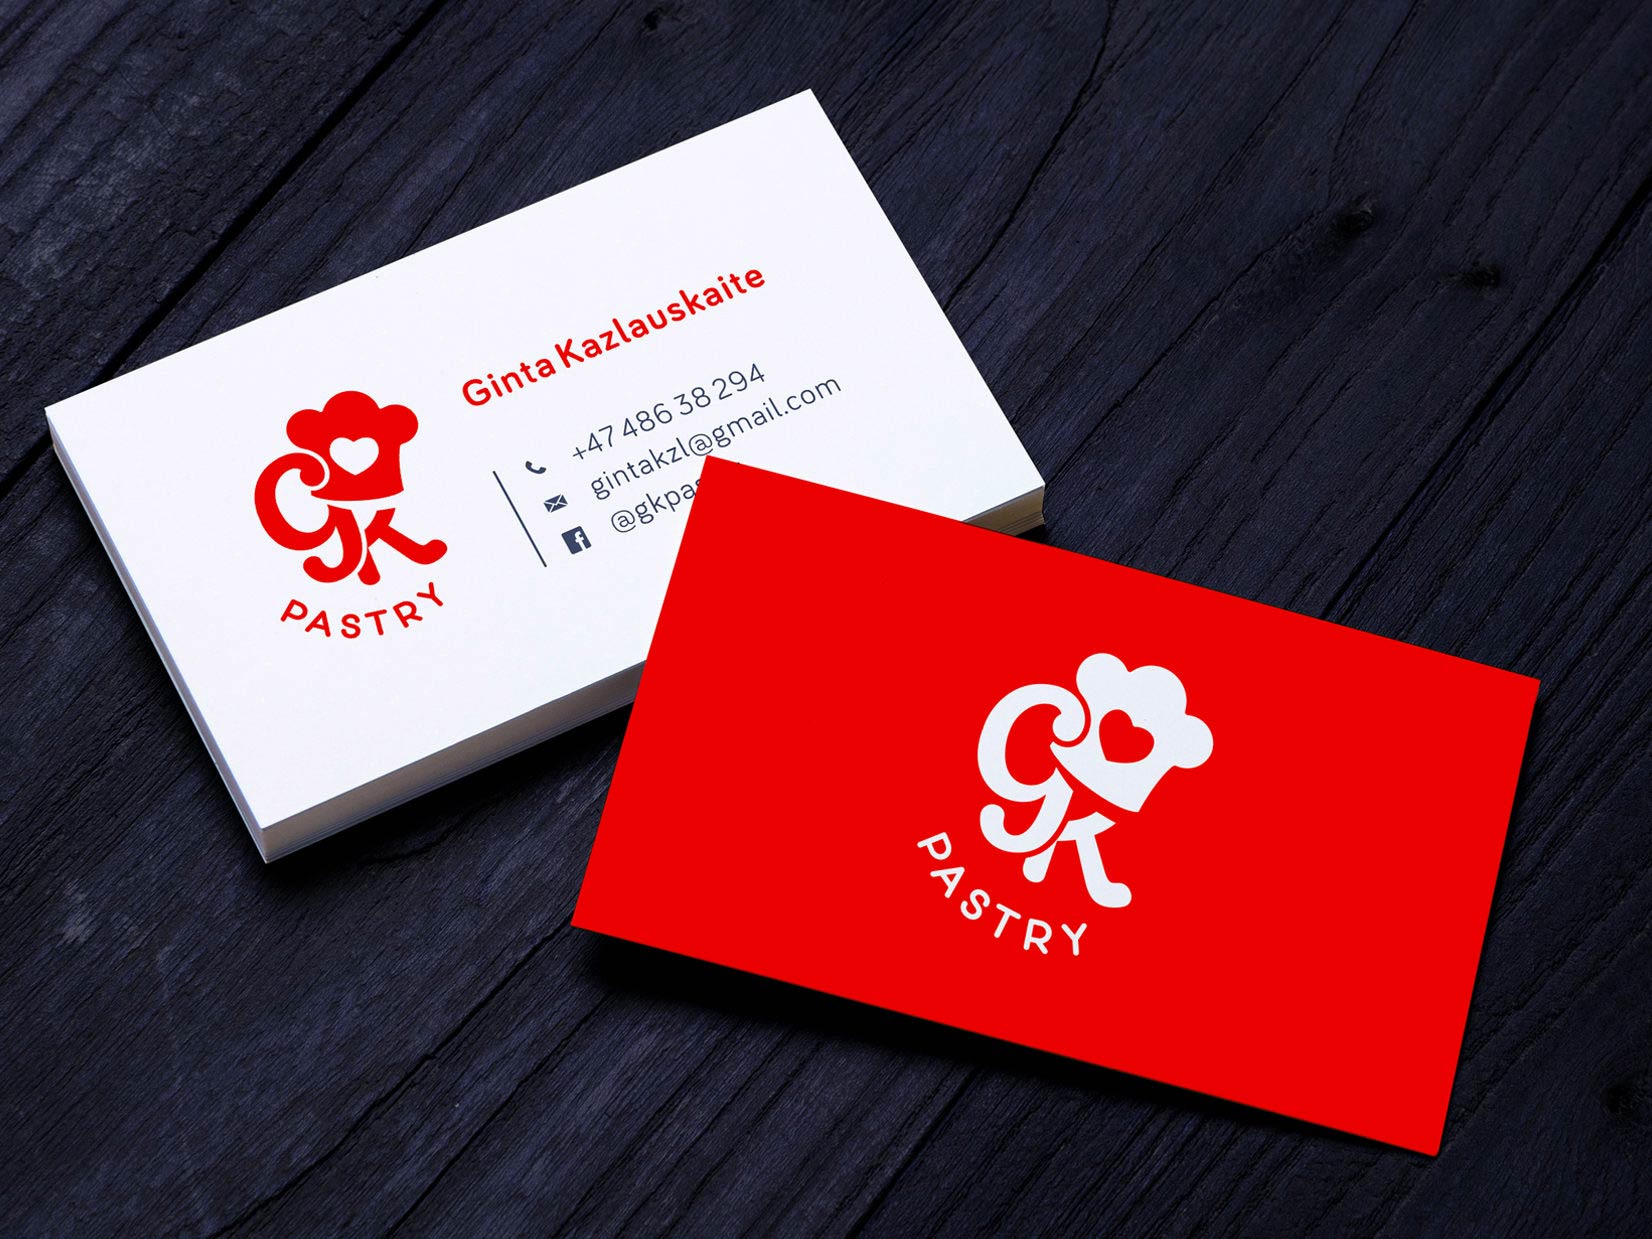 GK Pastry business cards.